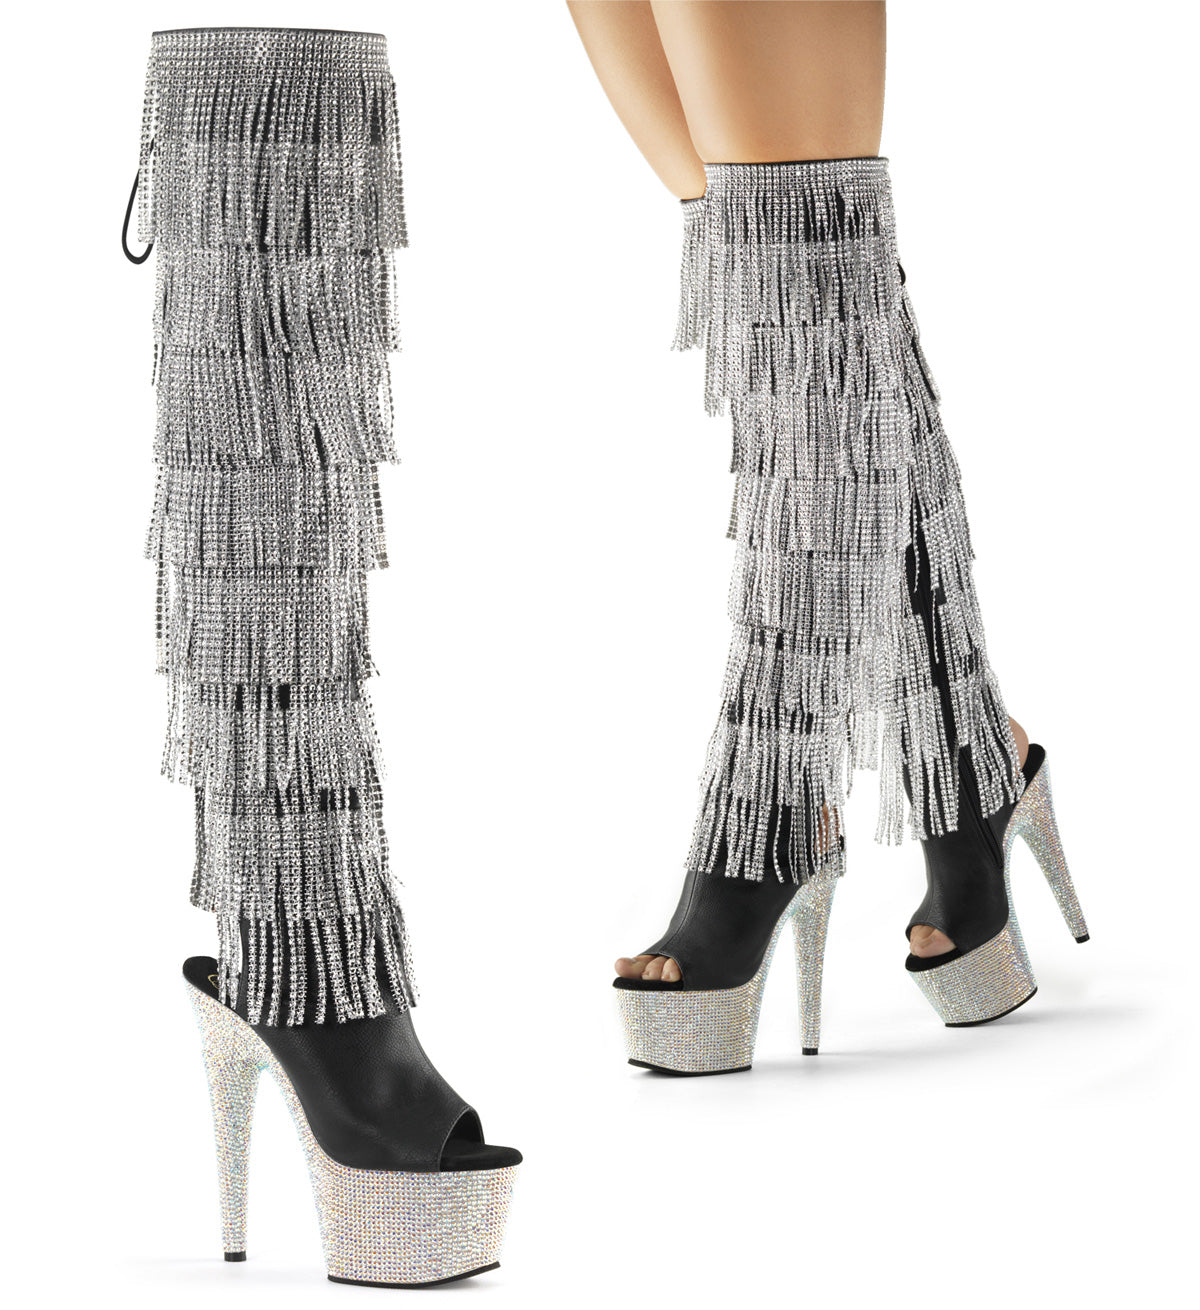 Bejeweled Thigh High Boots Black-Silver Boots